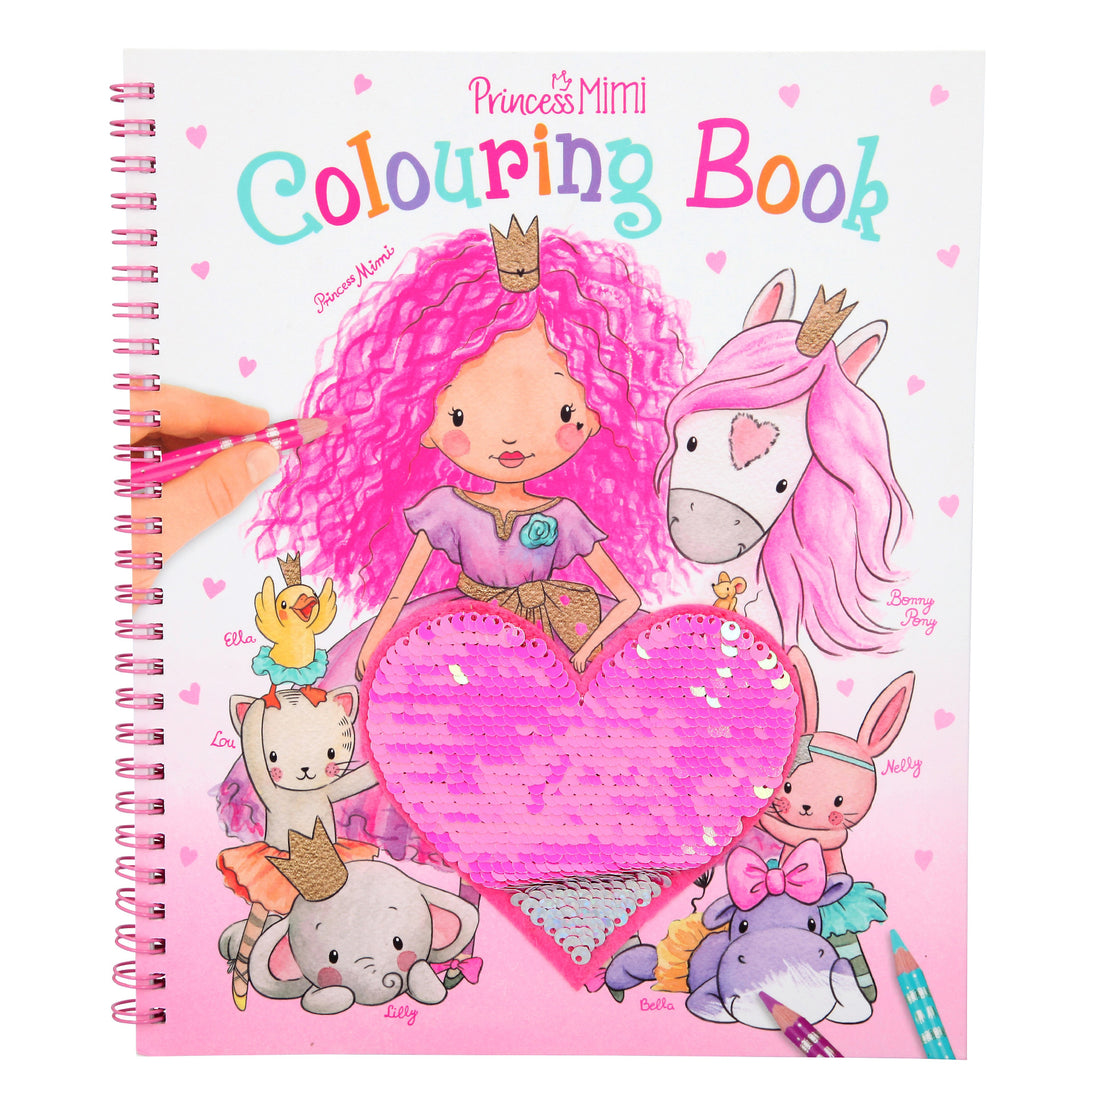 depesche-princess-mimi-colouring-book-with-sequins-pink-heart-animals- (4)